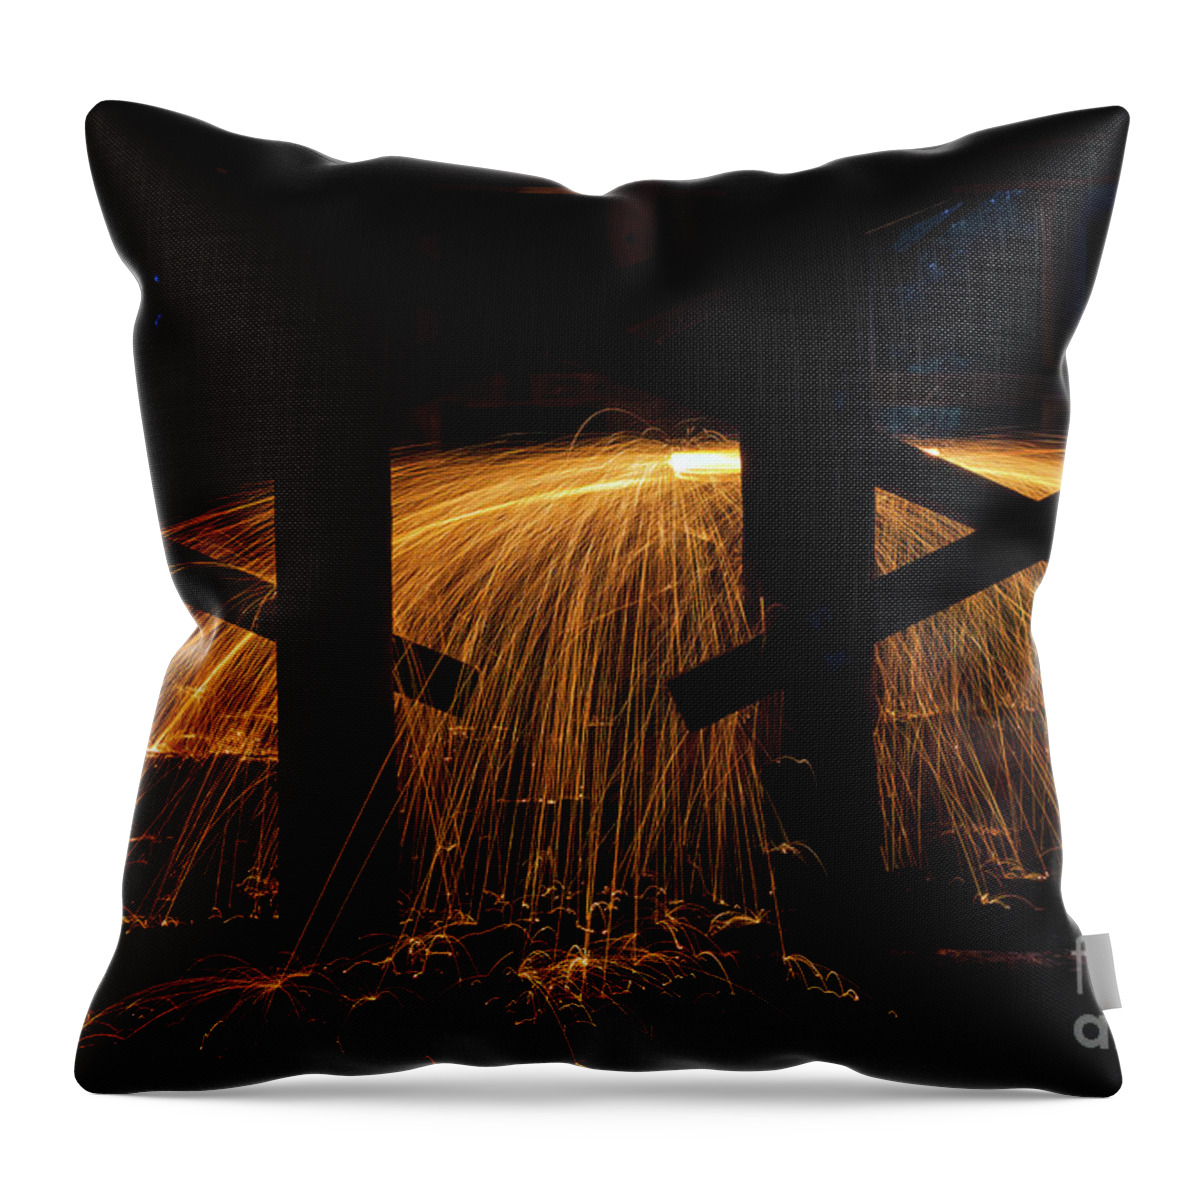 Steel Wool Throw Pillow featuring the photograph Steel Wool Light Play by Elaine Teague